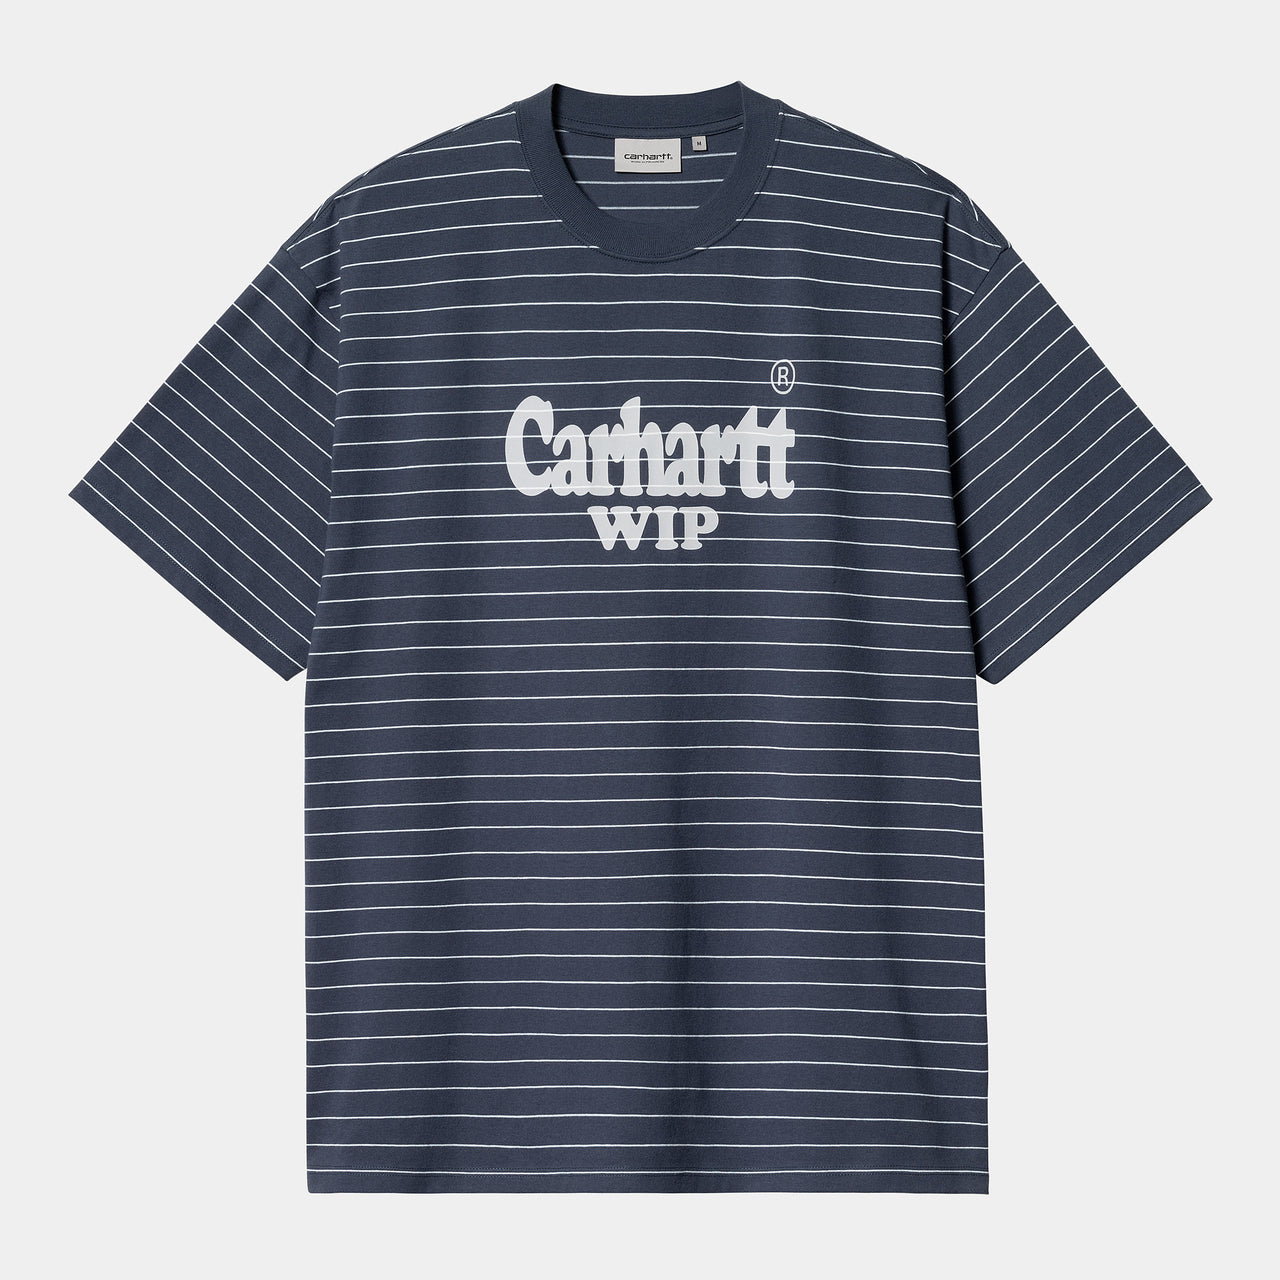 ORLEANS SPREE T-SHIRT BY CARHARTT WIP